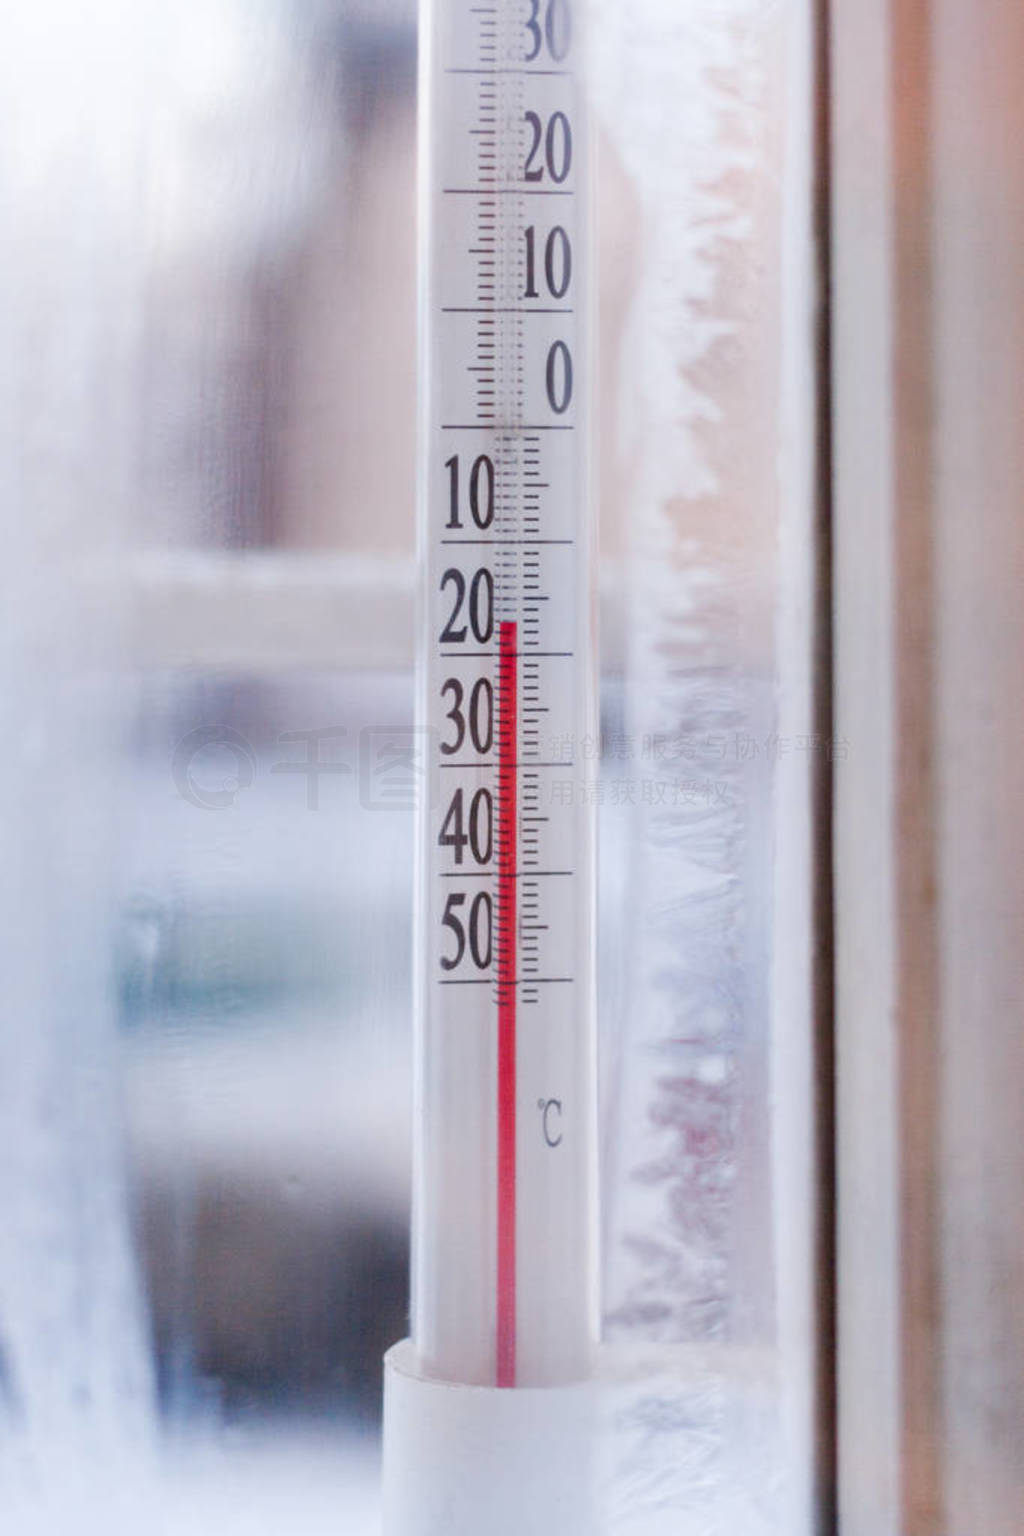 The view through frozen window to the outdoor thermometer which